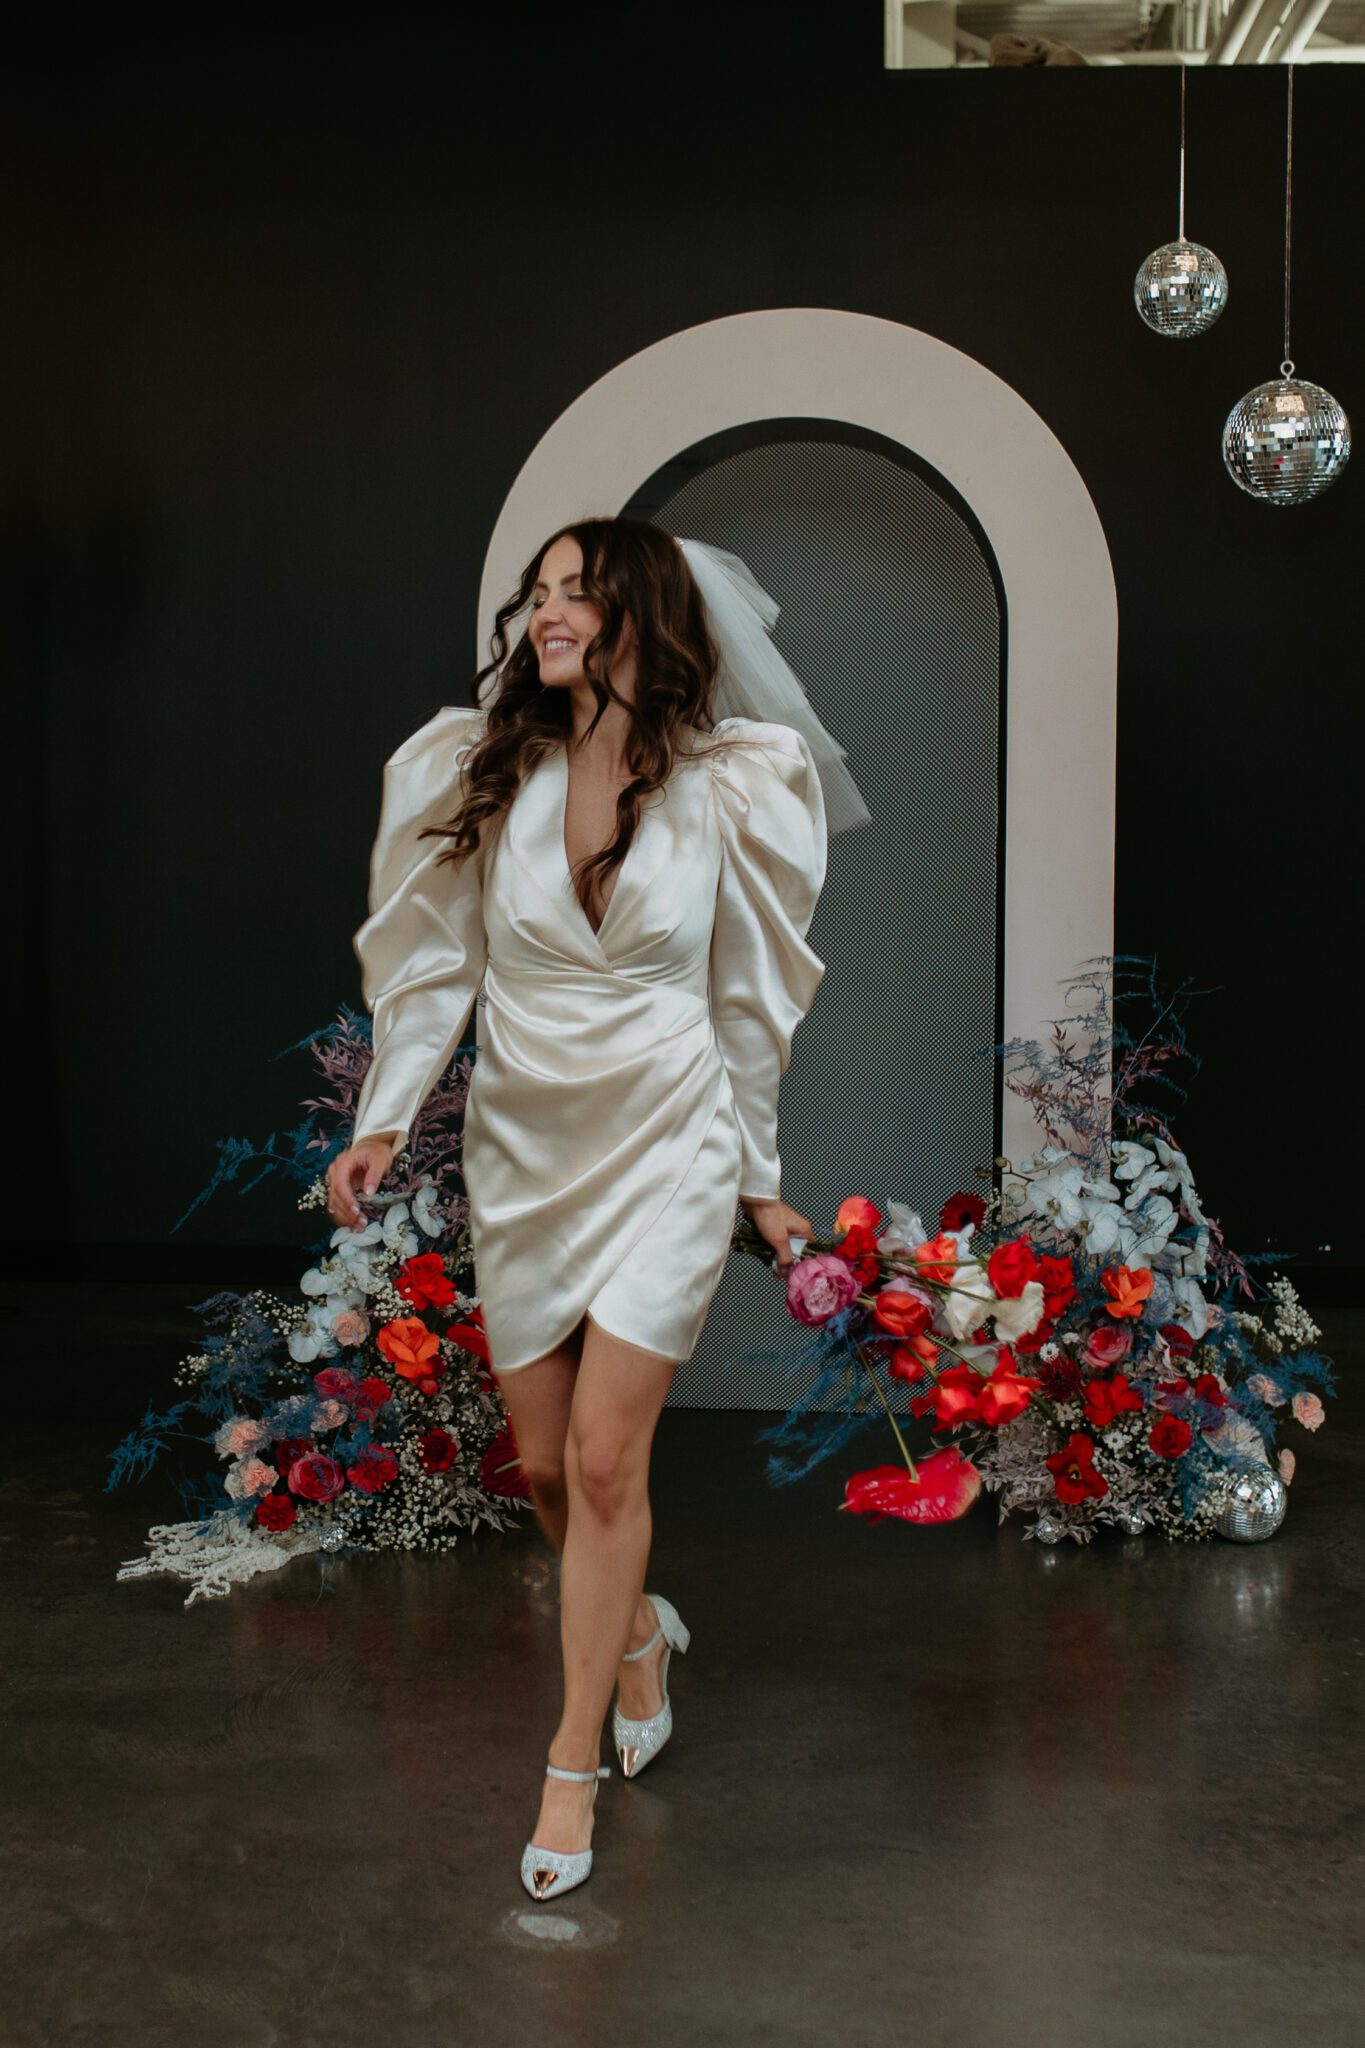 Chic bride standing in front of wedding decor seamlessly blending modern and retro styles, with eye-catching accents and retro-inspired stationery and signage contributing to the overall stylish atmosphere.